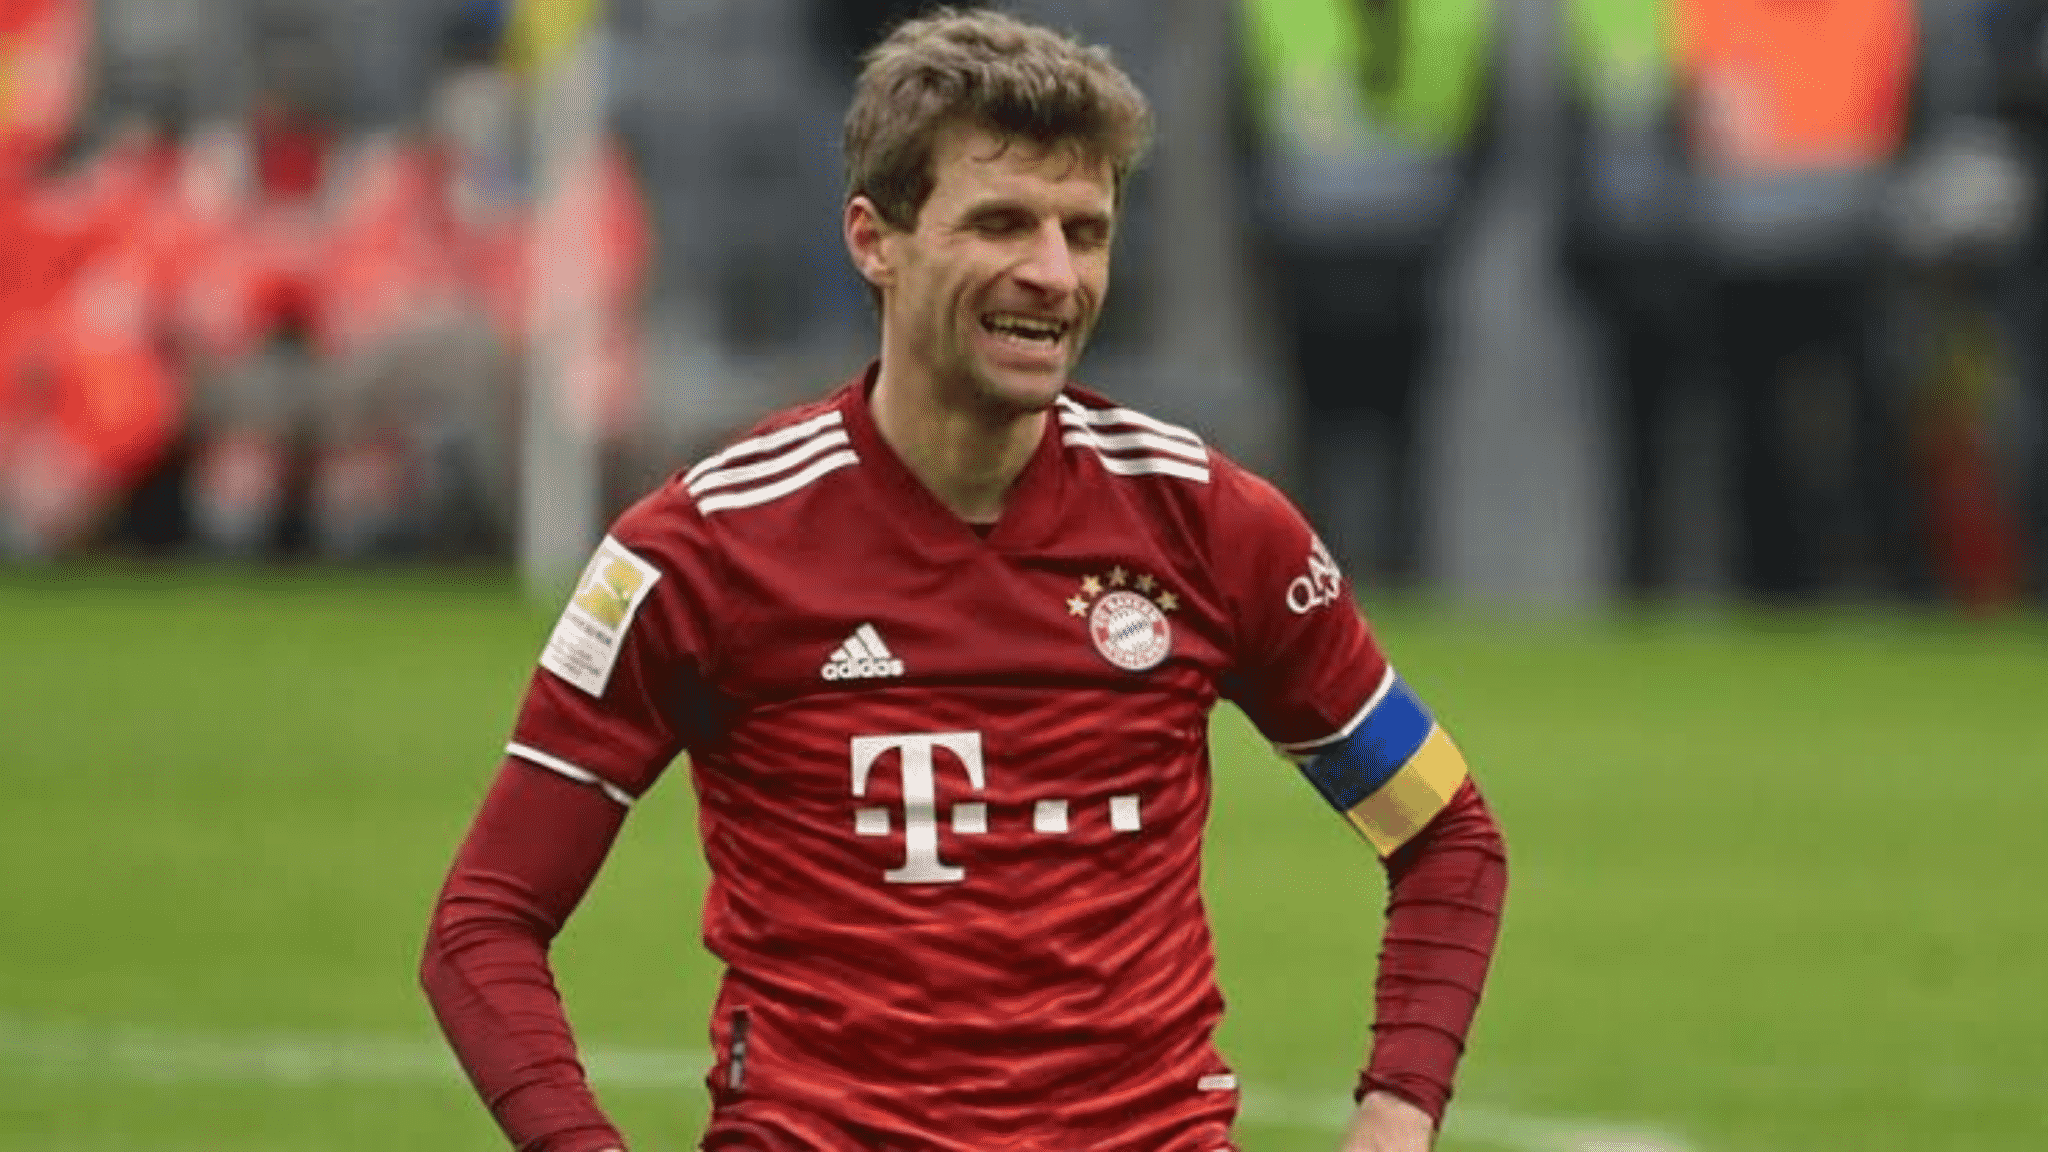 Rare Thomas Muller Own Goal sees Bayern Munich Drop Points for Second Time in Four Games Football Facts